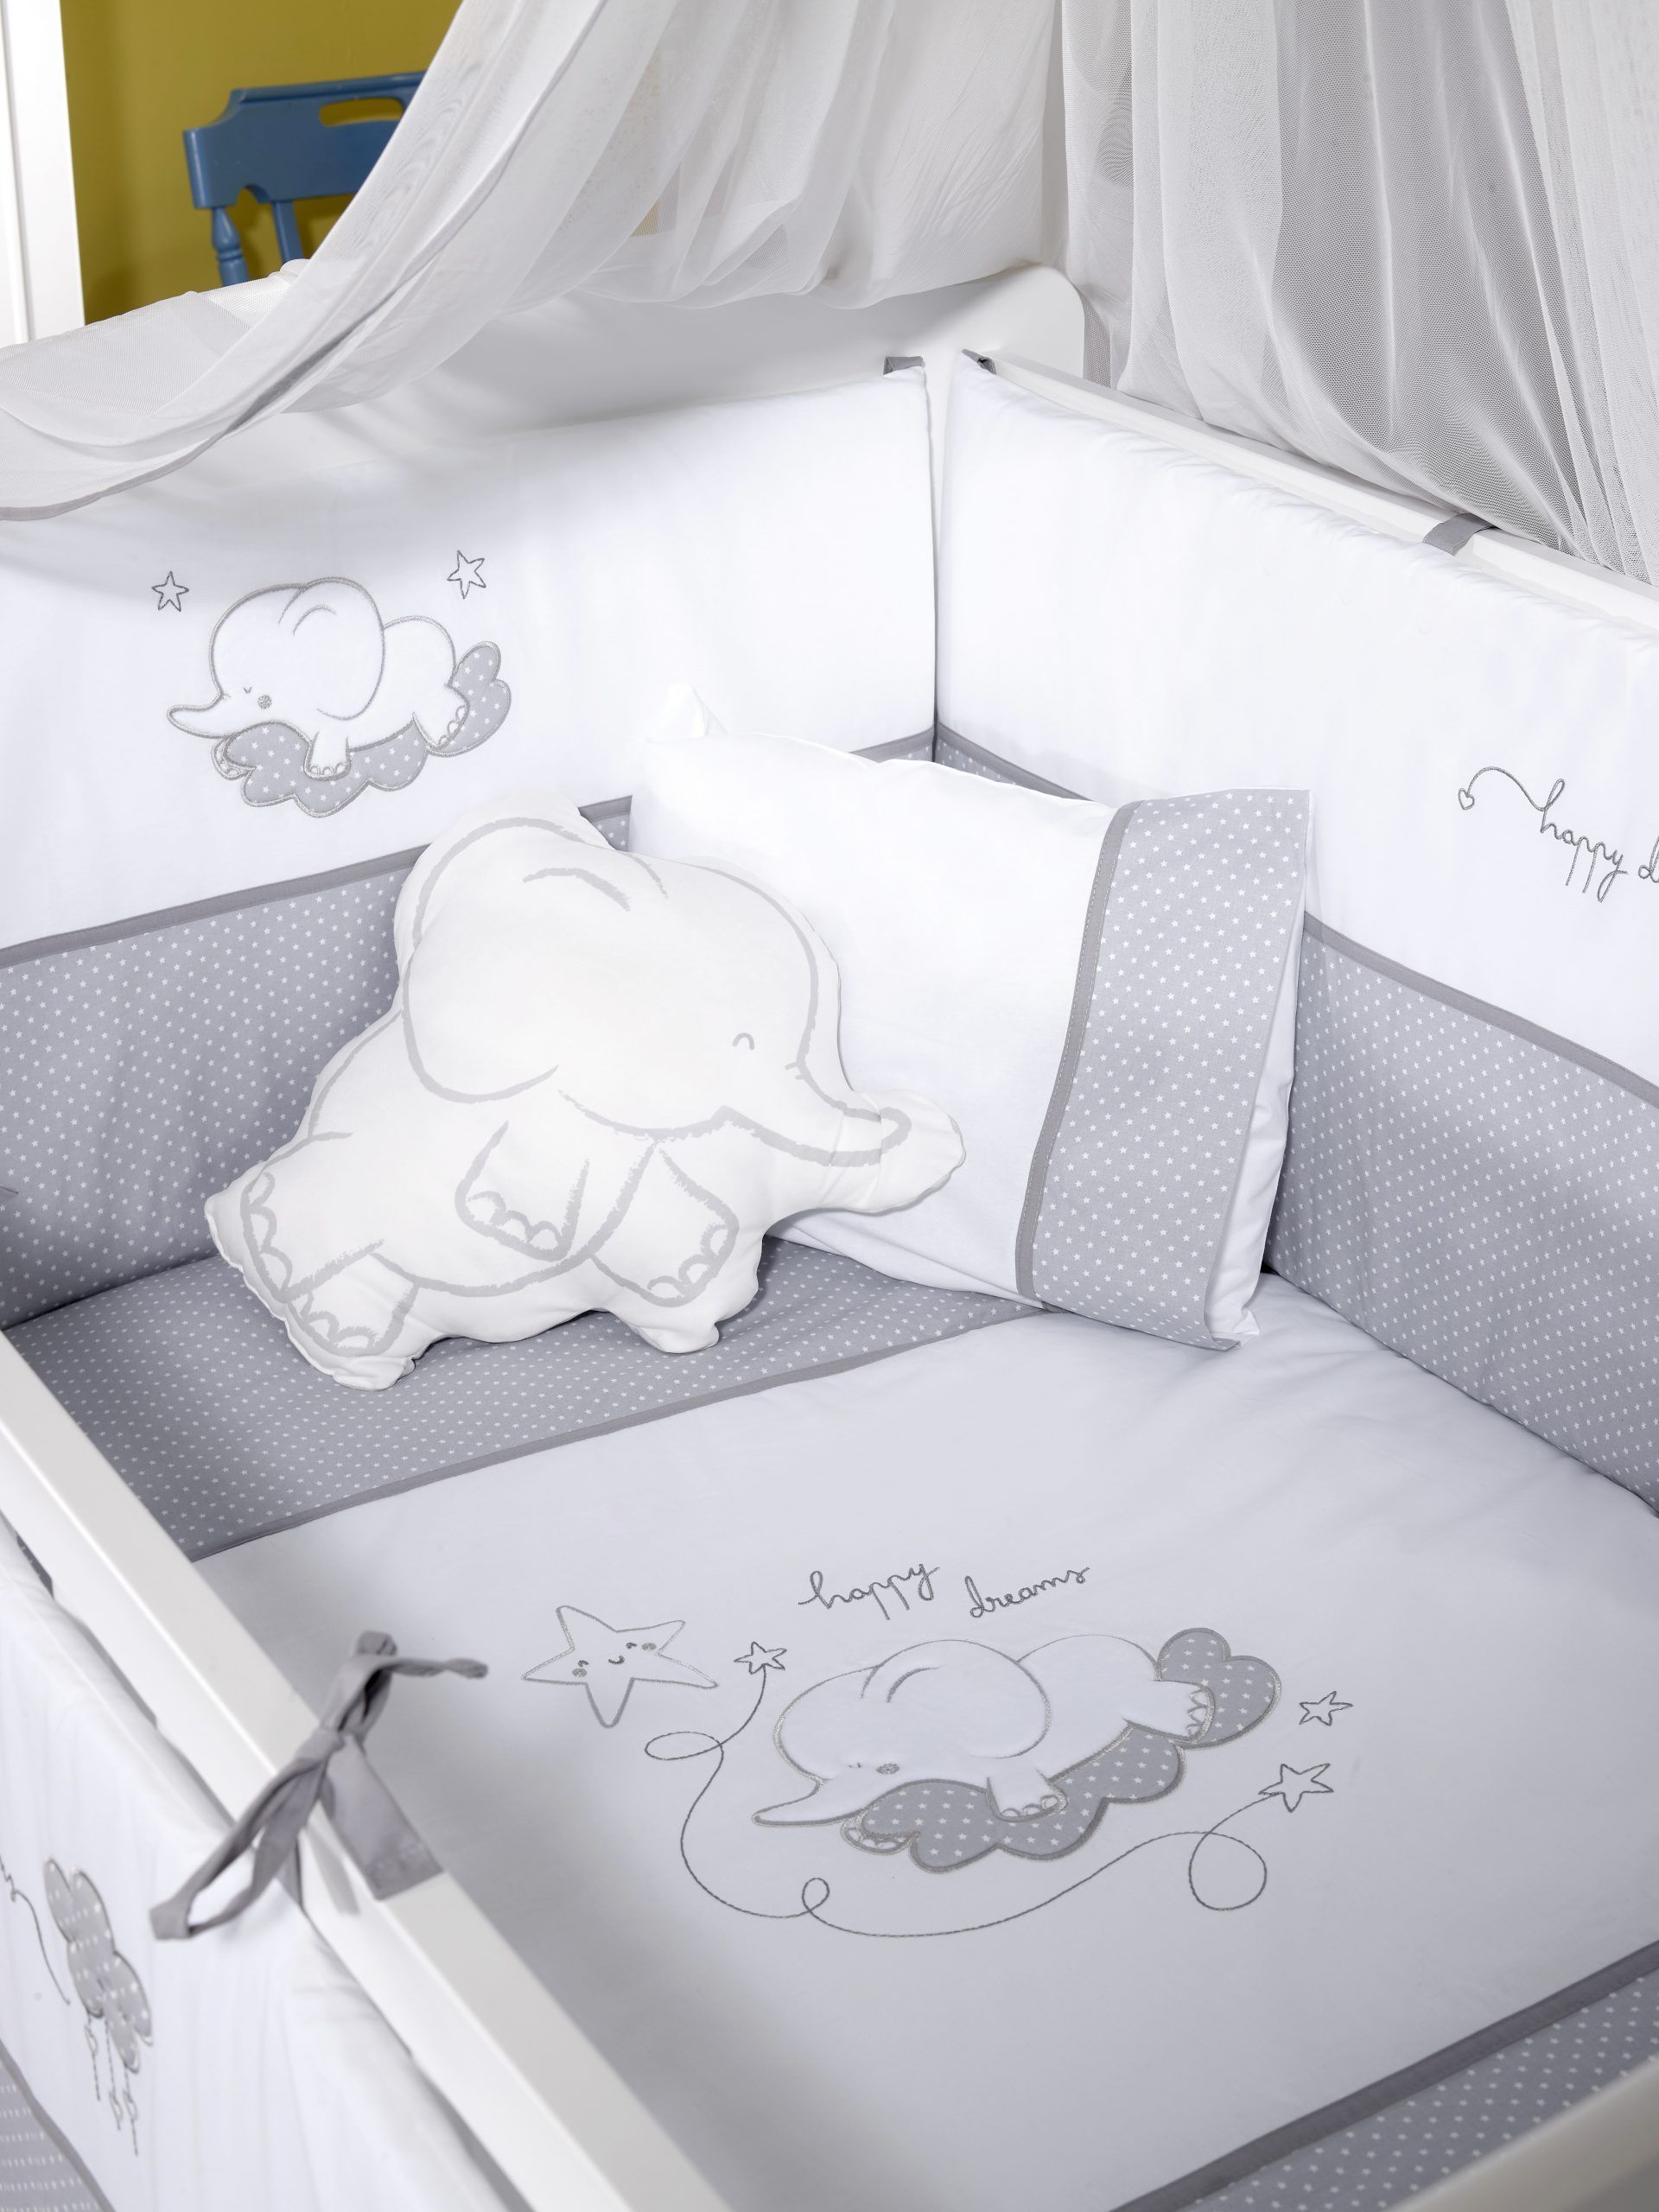 Carino Grey Convertible Baby-Child Craddle & Bed 0-12 years old ( Bed Textile & Mattress Included) General MELTEM SMART 